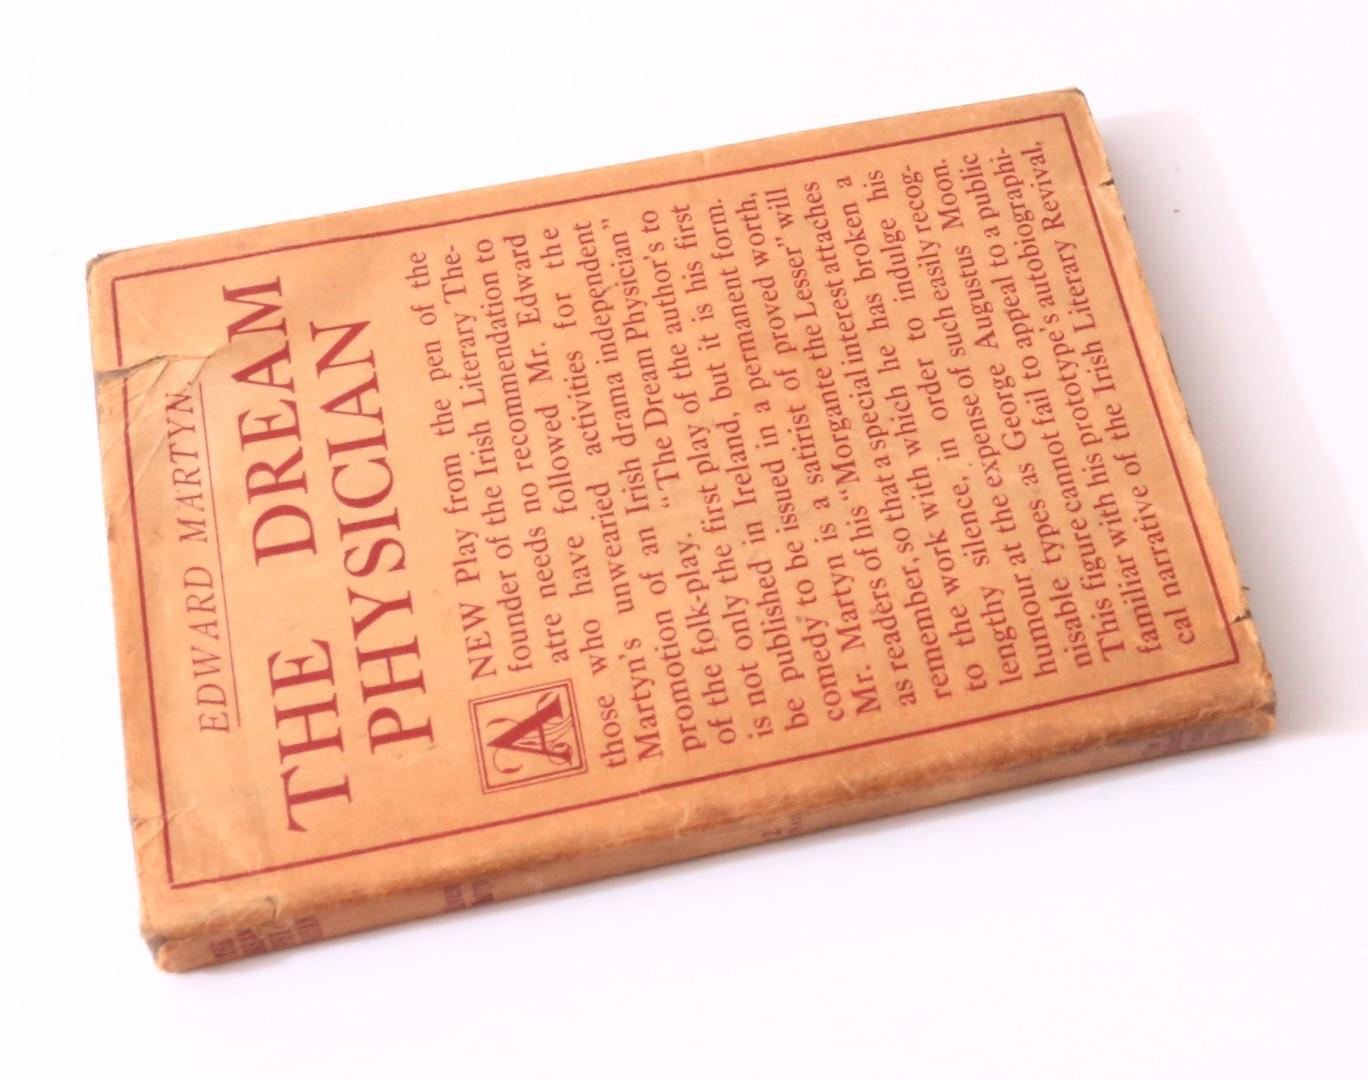 Edward Martyn - The Dream Physician - The Talbot Press and T. Fisher Unwin, 1915, First Edition.